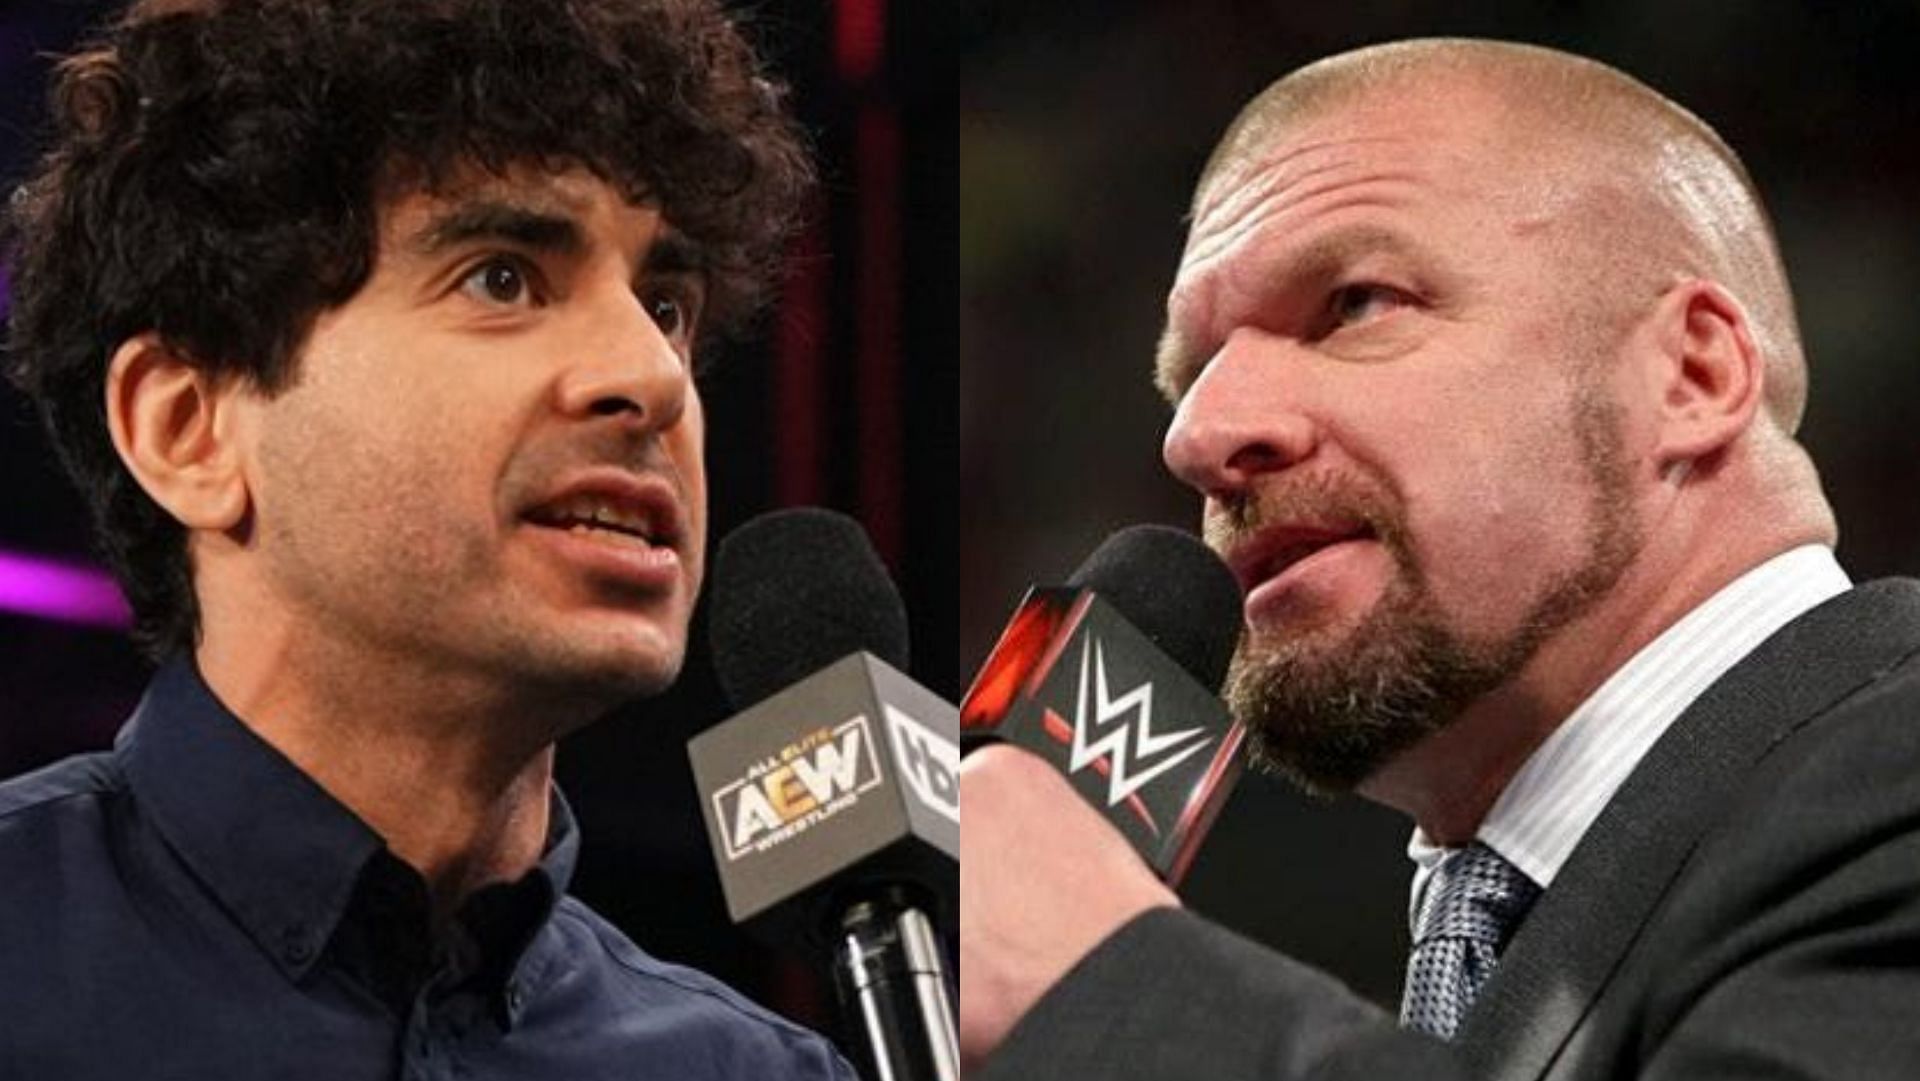 Tony Khan and Triple H have got a similar way of thinking